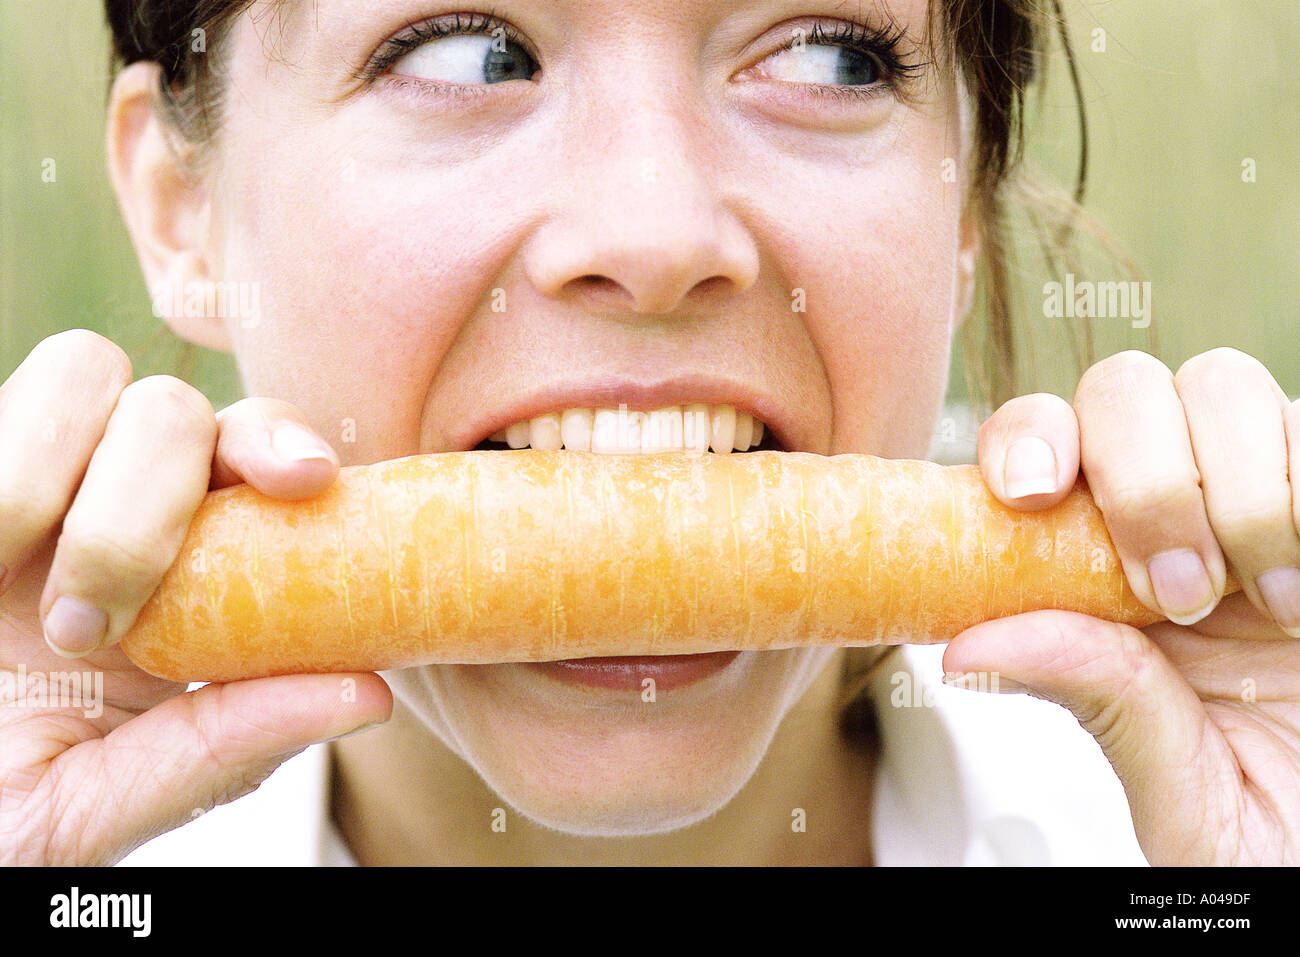 Close up portrait of young woman biting into a carrot Stock Photo